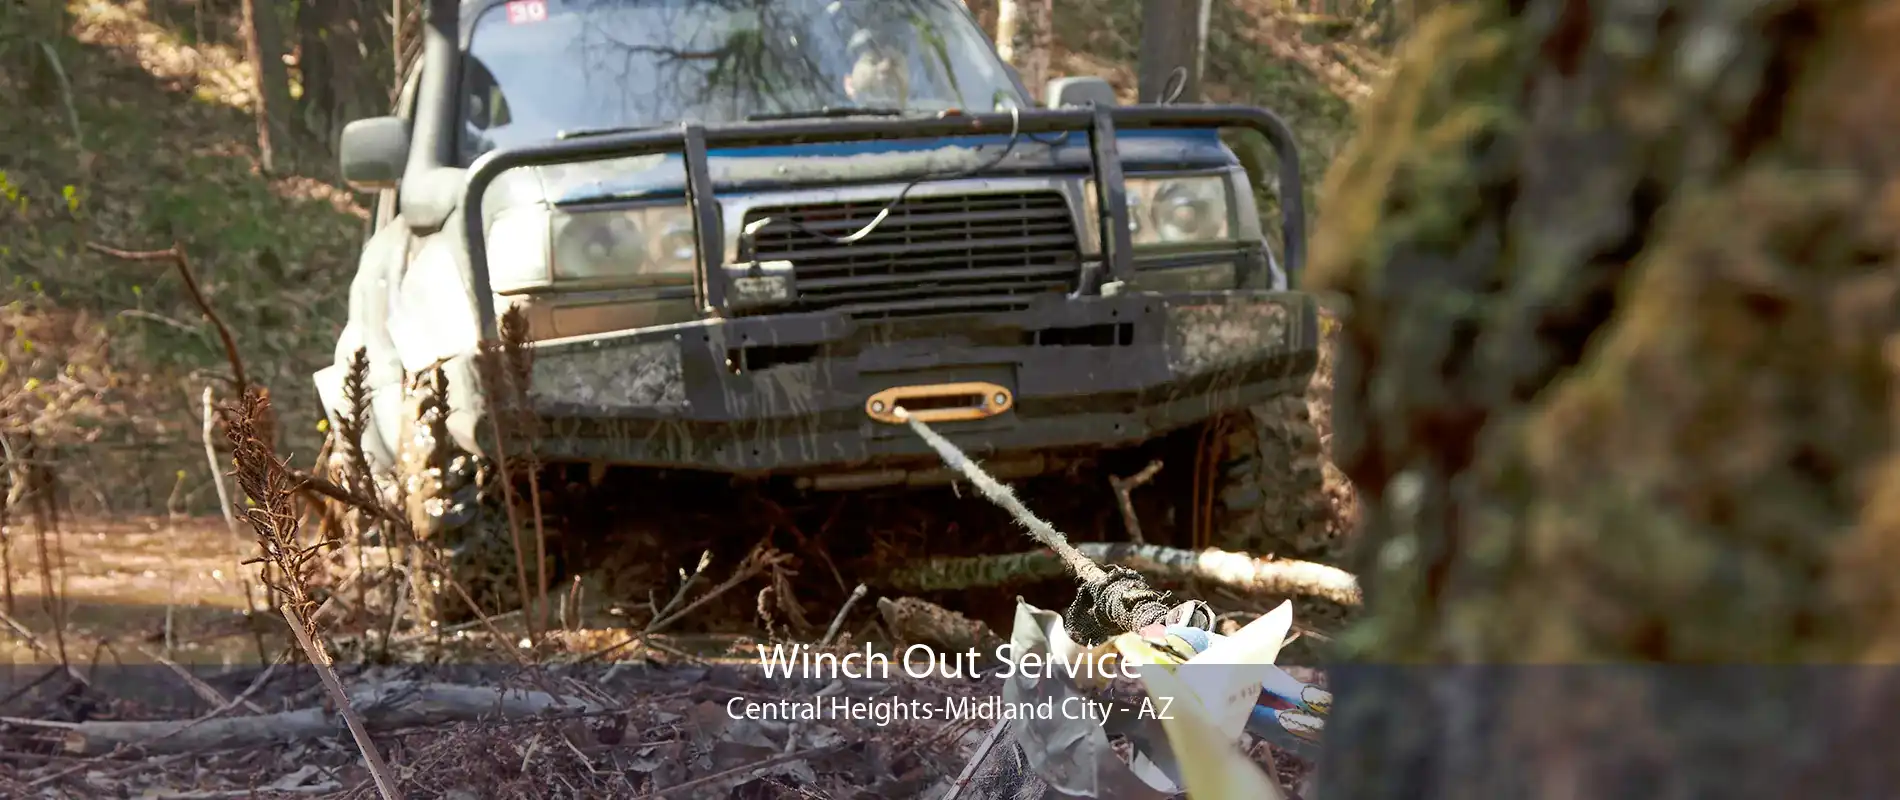 Winch Out Service Central Heights-Midland City - AZ